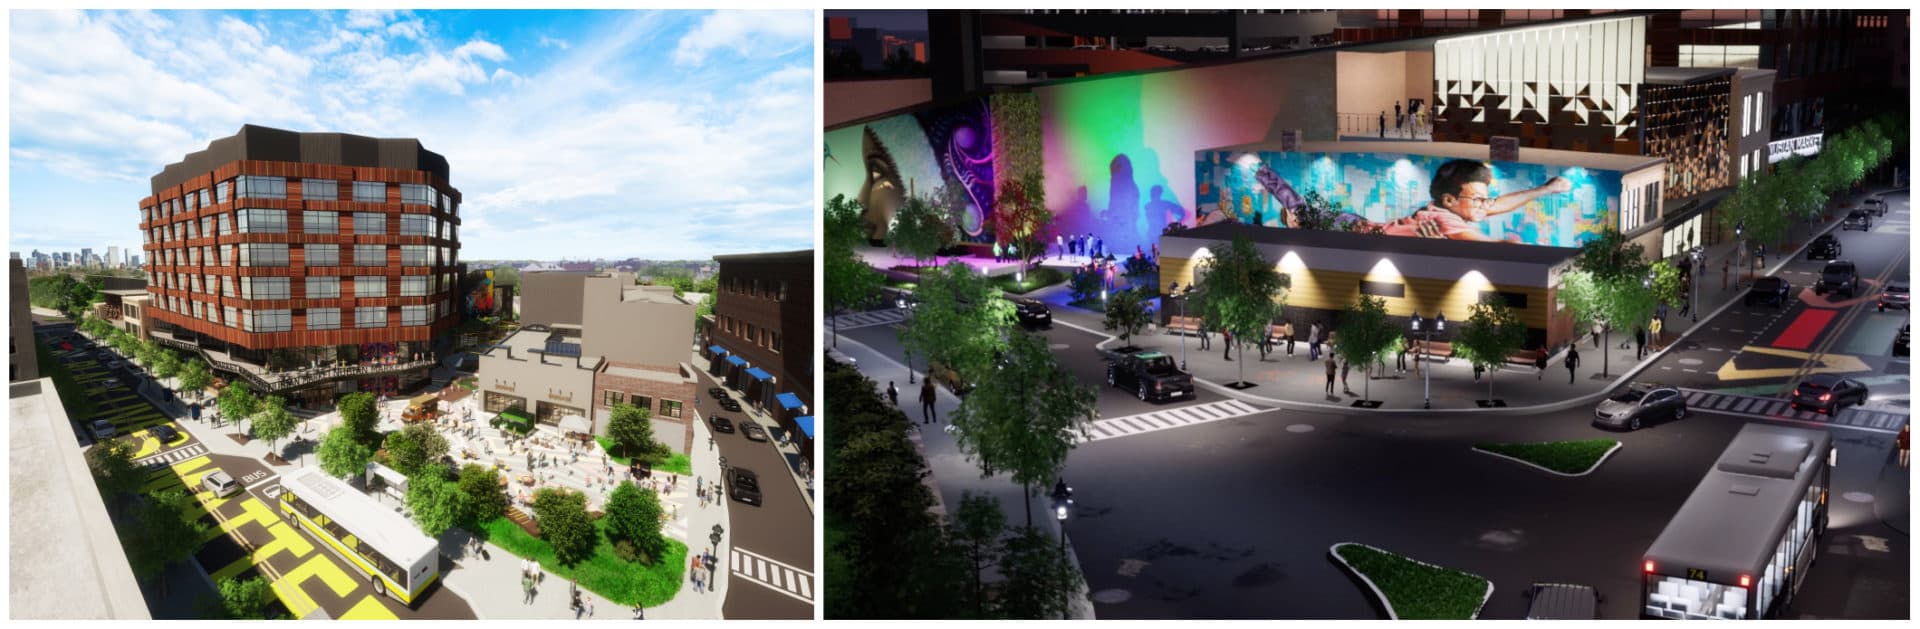 Renderings of Nubian Square Ascends. (Courtesy Nubian Square Ascends)